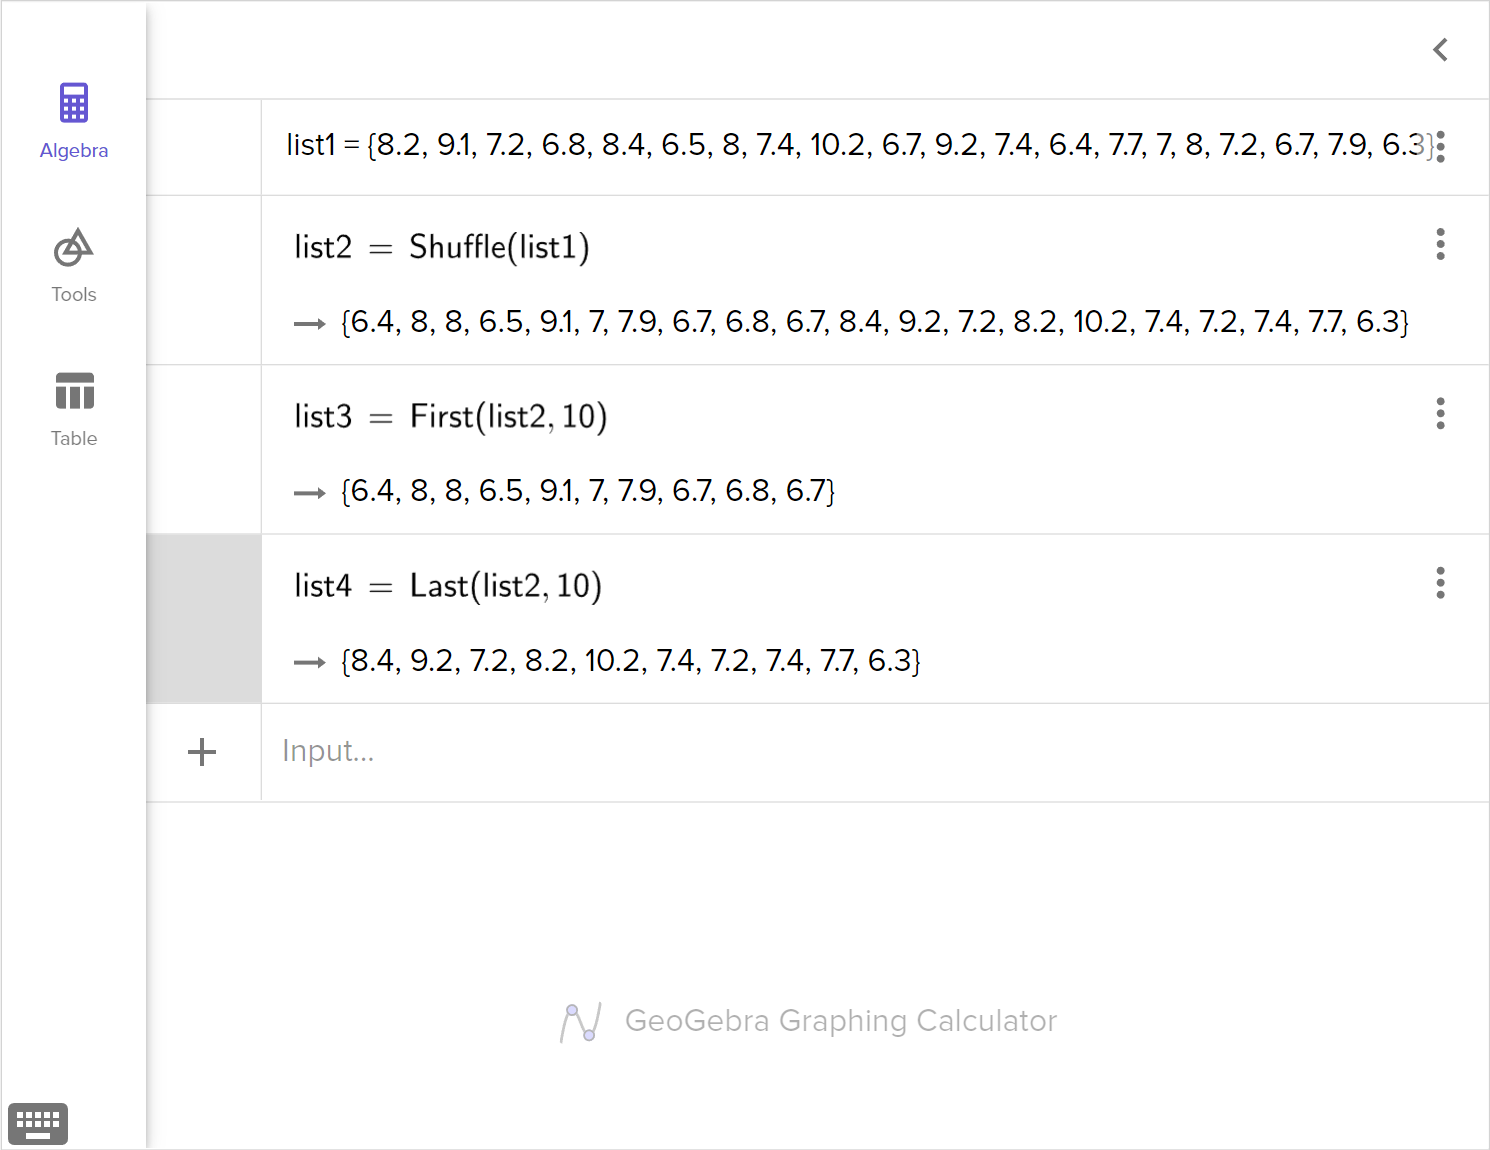 A screenshot of the GeoGebra graphing calculator showing how to split a list with 20 elements into two lists with 10 elements each. Speak to your teacher for more details.